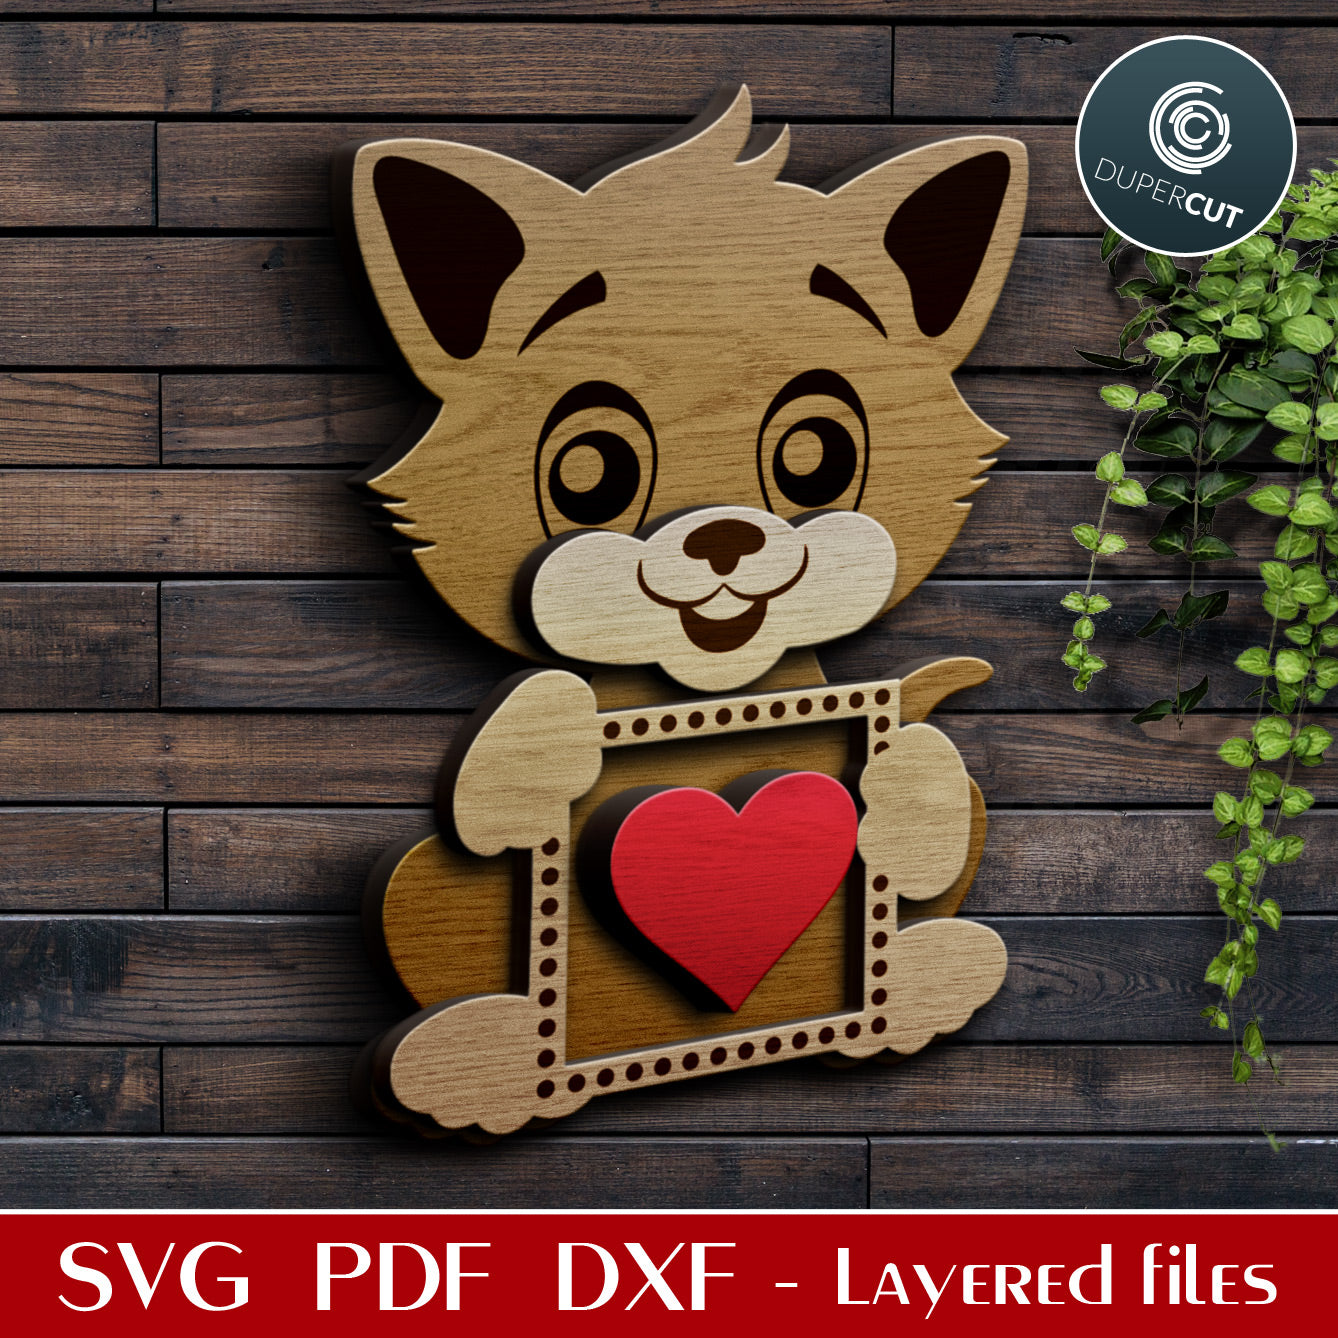 Valentines Day Kitten with heart - Layered laser cutting files - SVG PDF vector template for Glowforge, Cricut, Silhouette Cameo, CNC plasma machines 